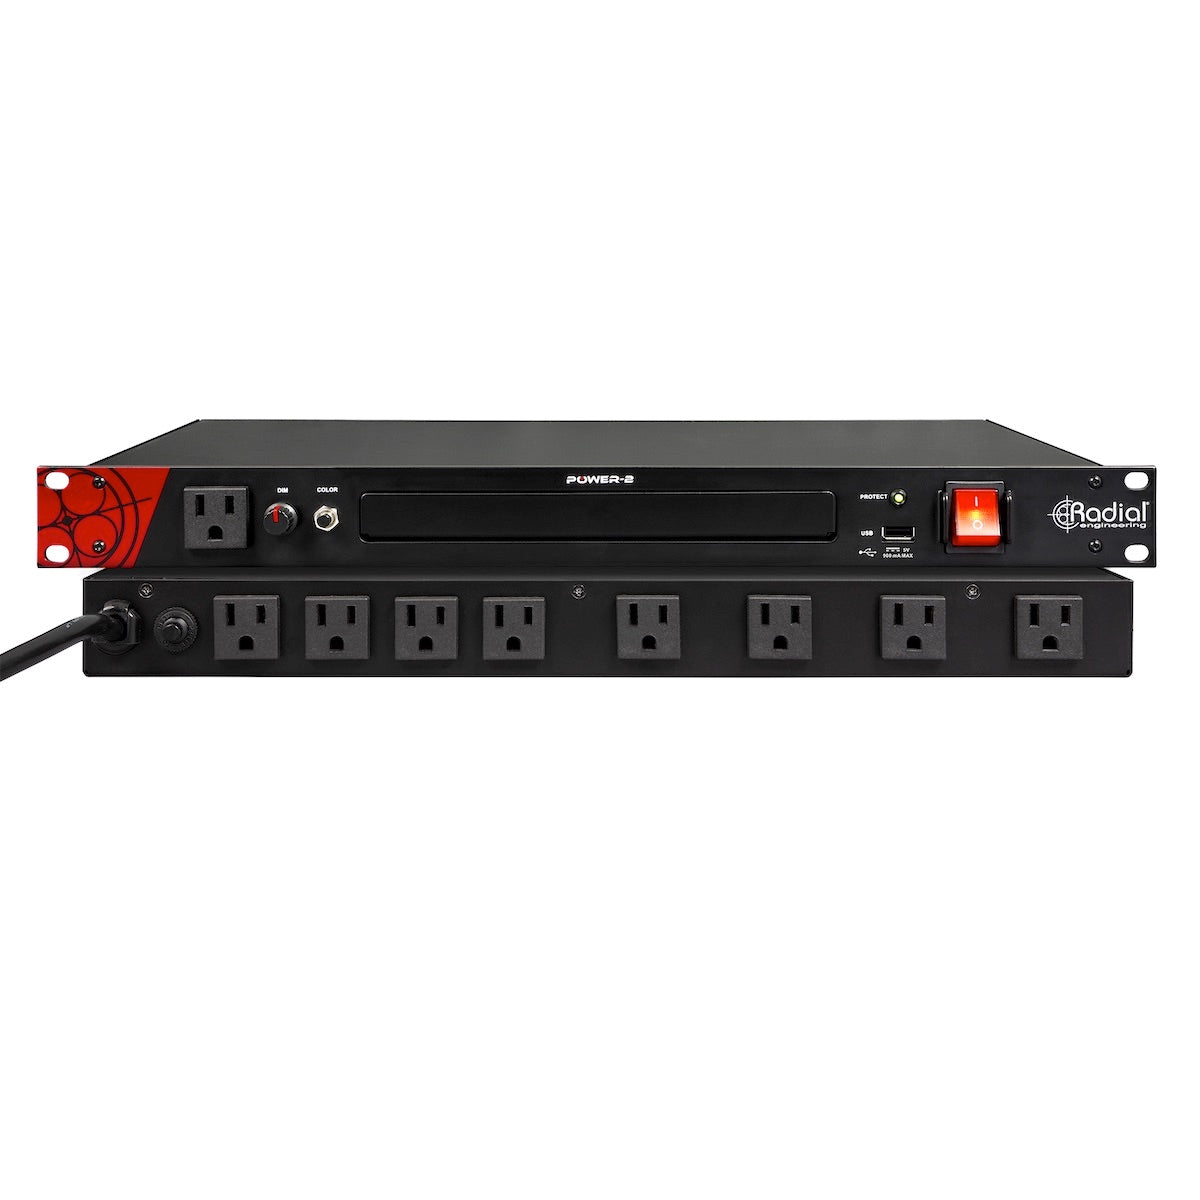 Radial Power-2 Rackmount Power Conditioner Surge Suppressor with LED Lighting, front and rear views